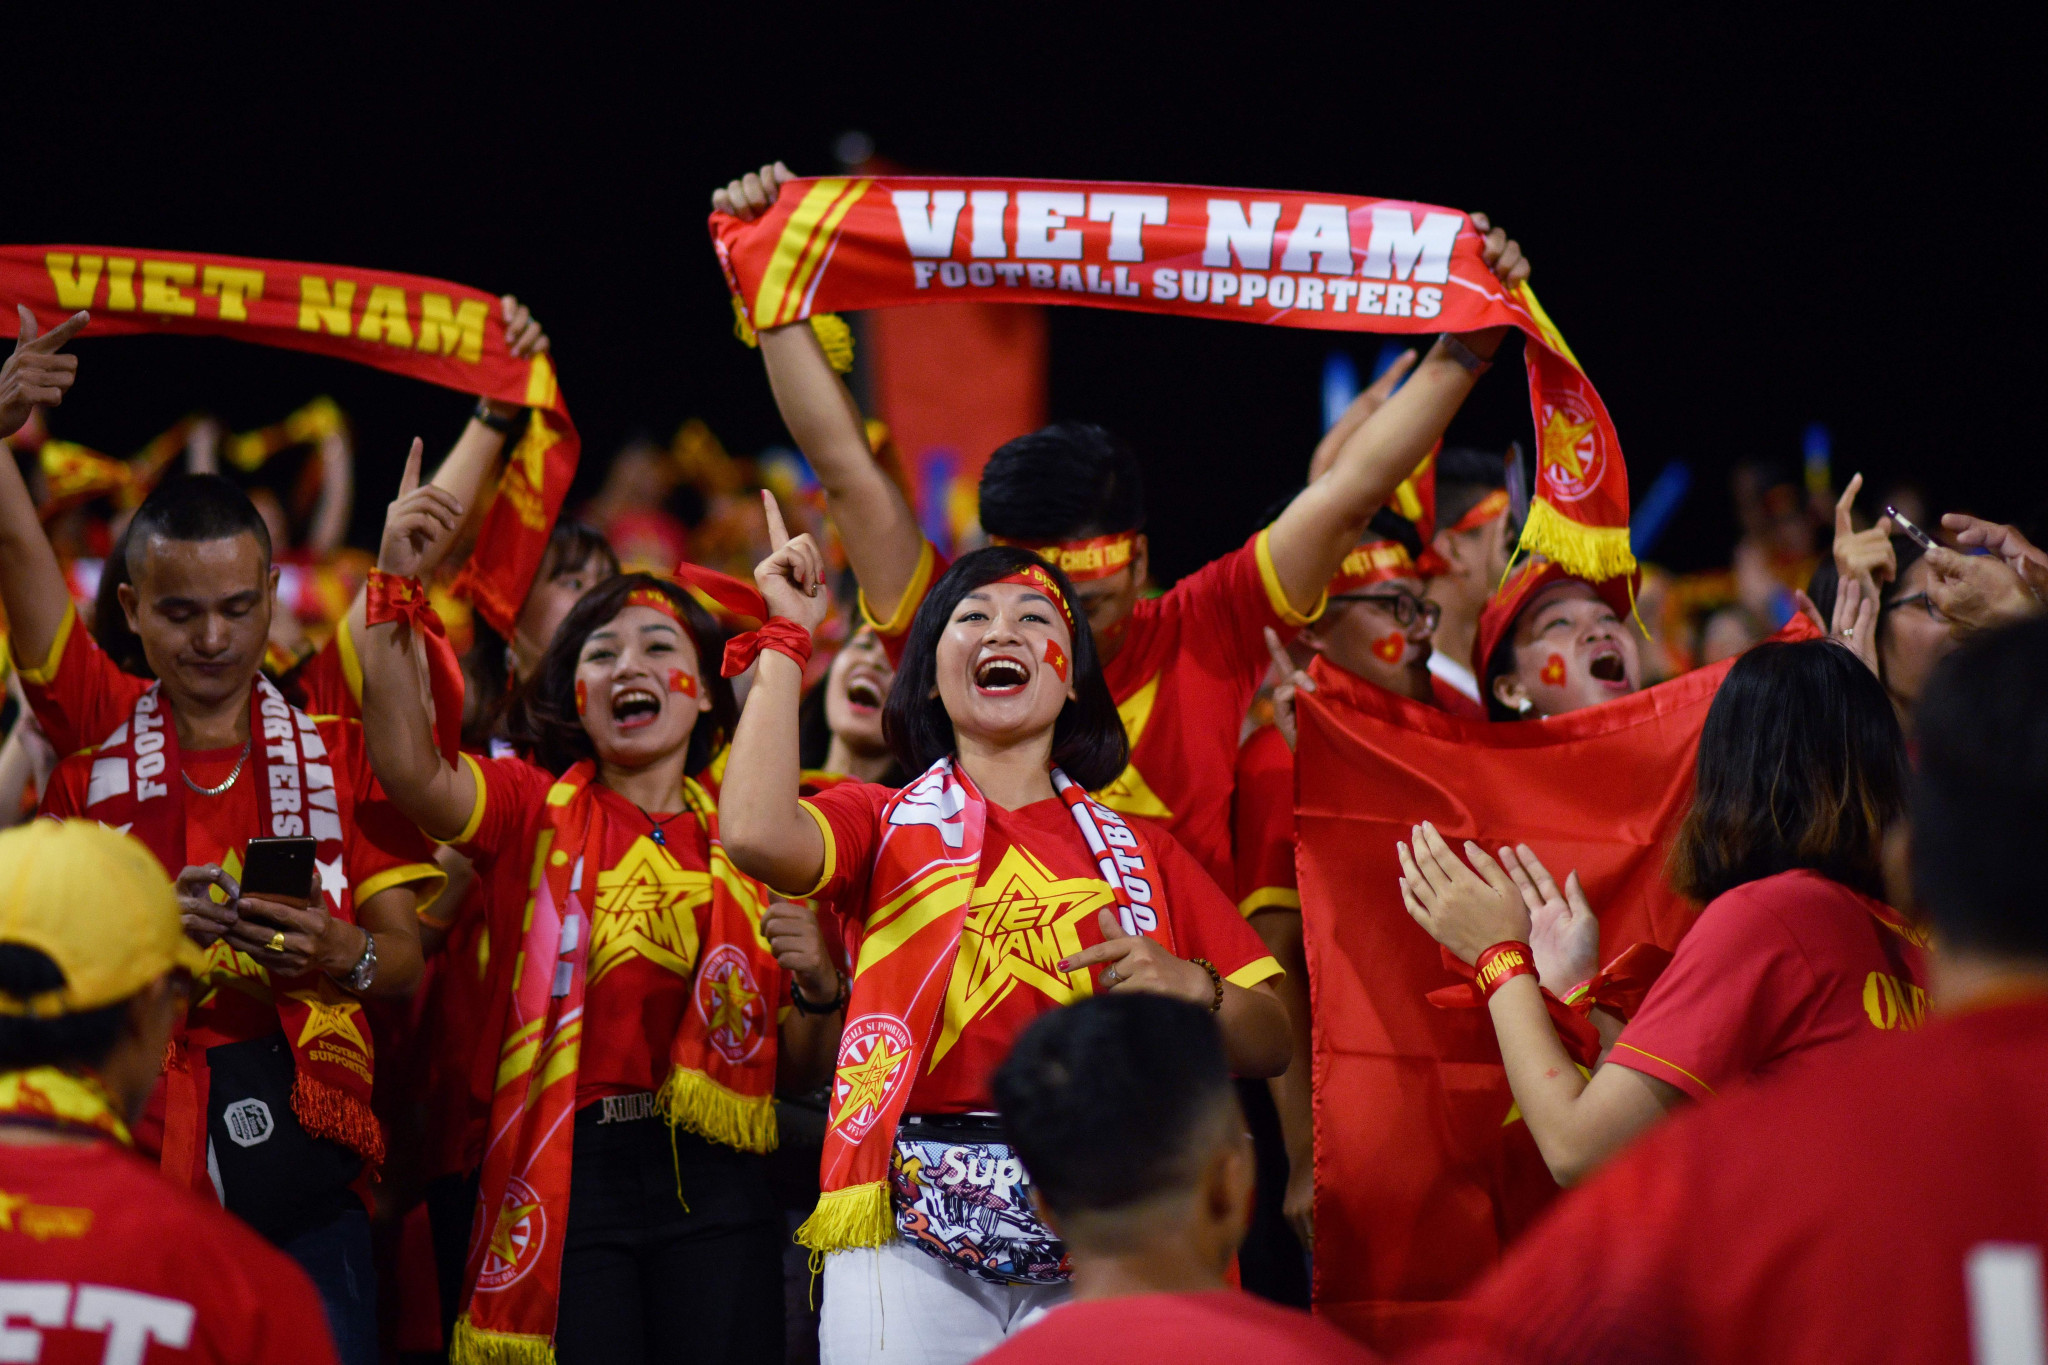 Hanoi will host the 2021 Southeast Asian Games ©Getty Images